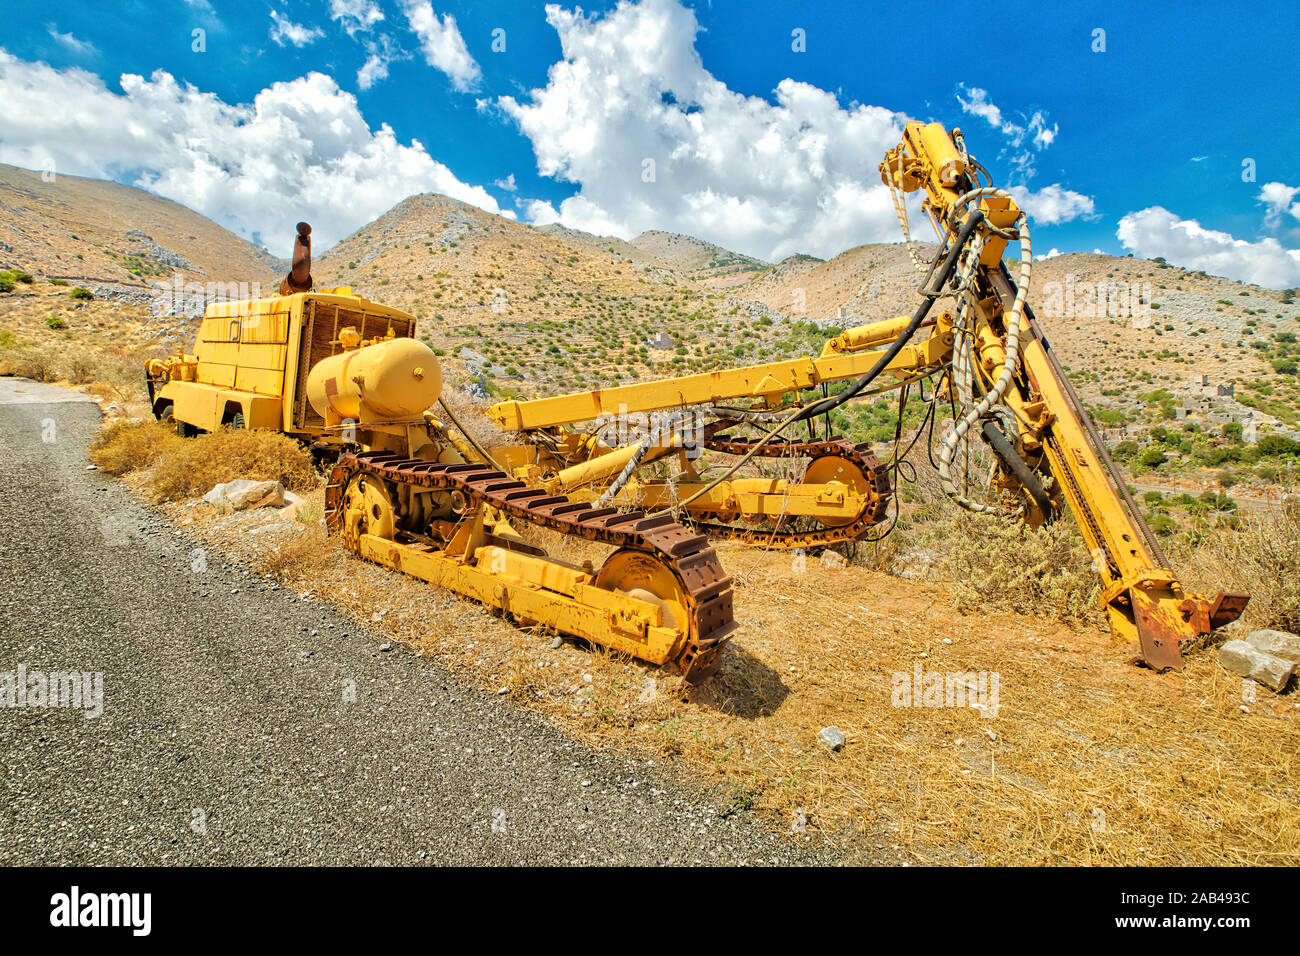 Tracked bulldozer with drilling machine at work along road. Work in progress, industrial machine. Mining landscape on background. Stock Photo